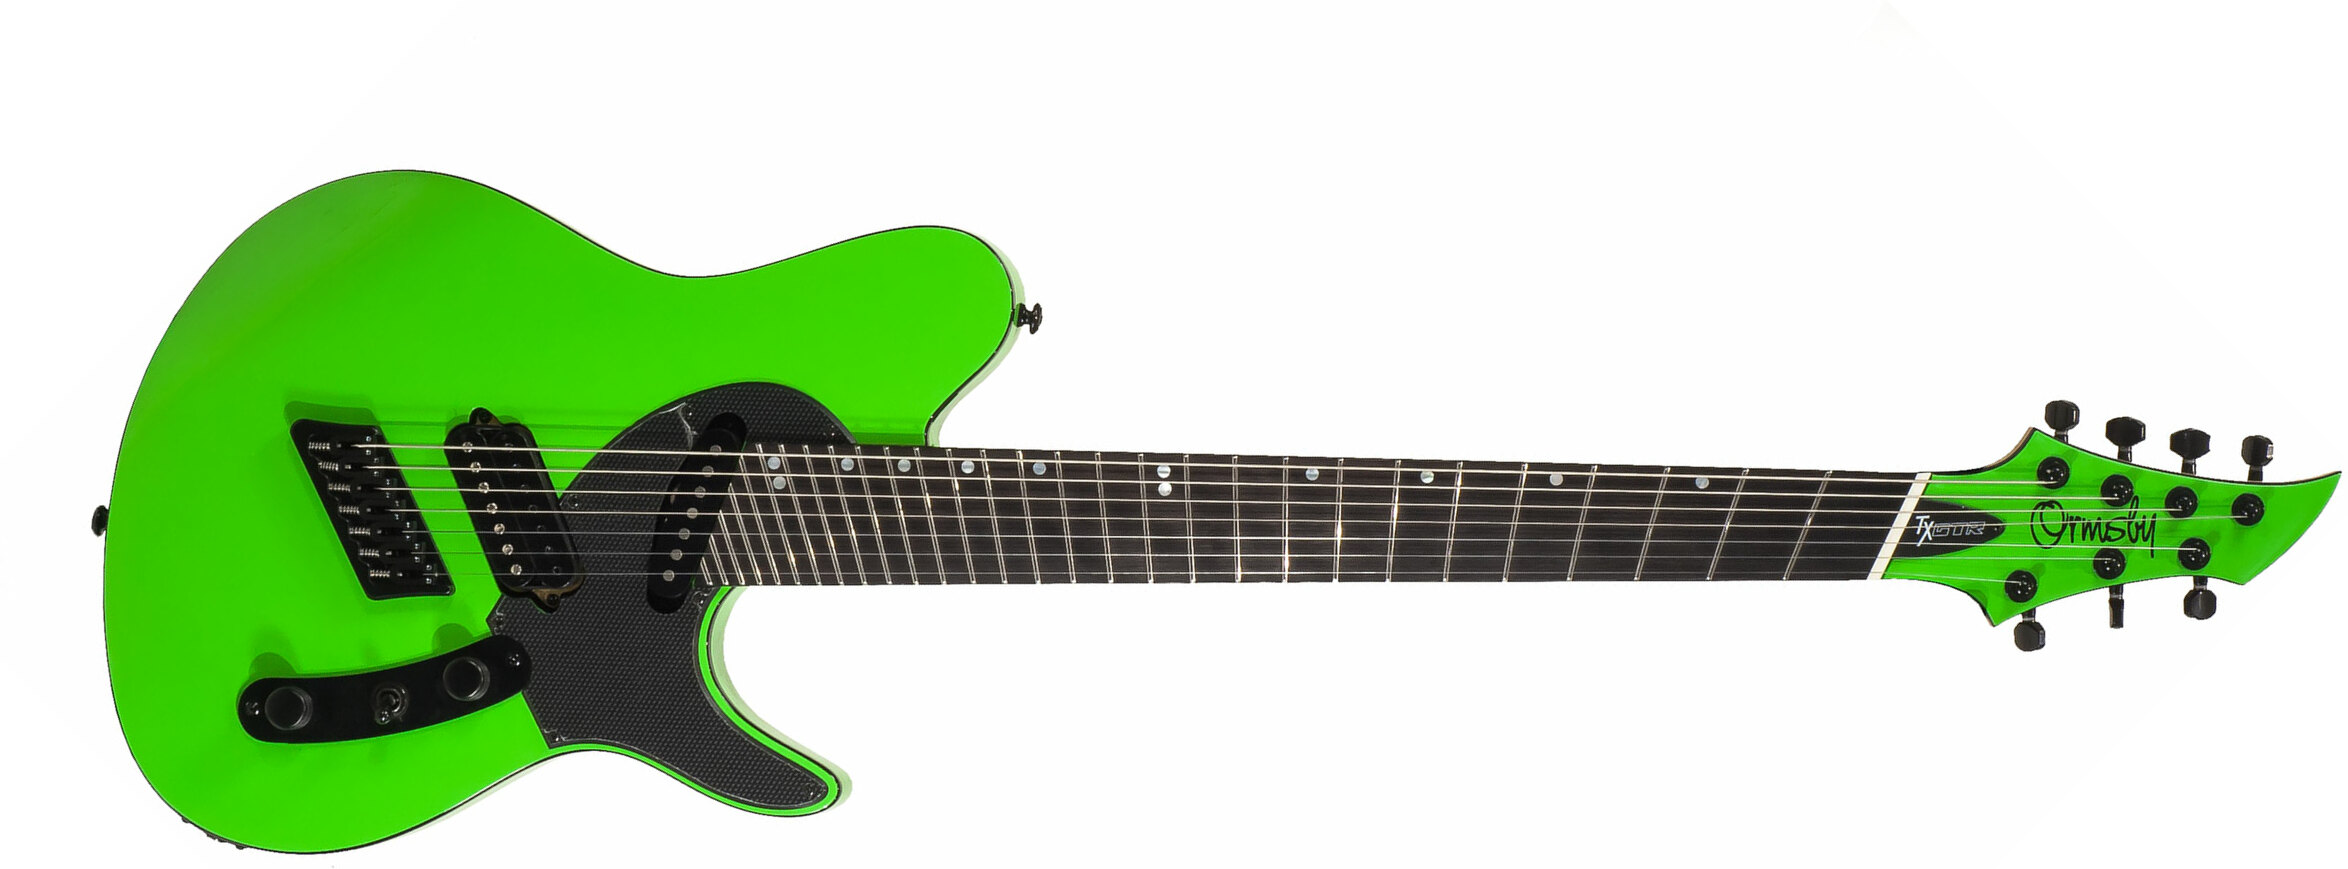 Ormsby Tx Gtr 7 Hs Ht Eb - Chernobyl Green - Multi-Scale Guitar - Main picture